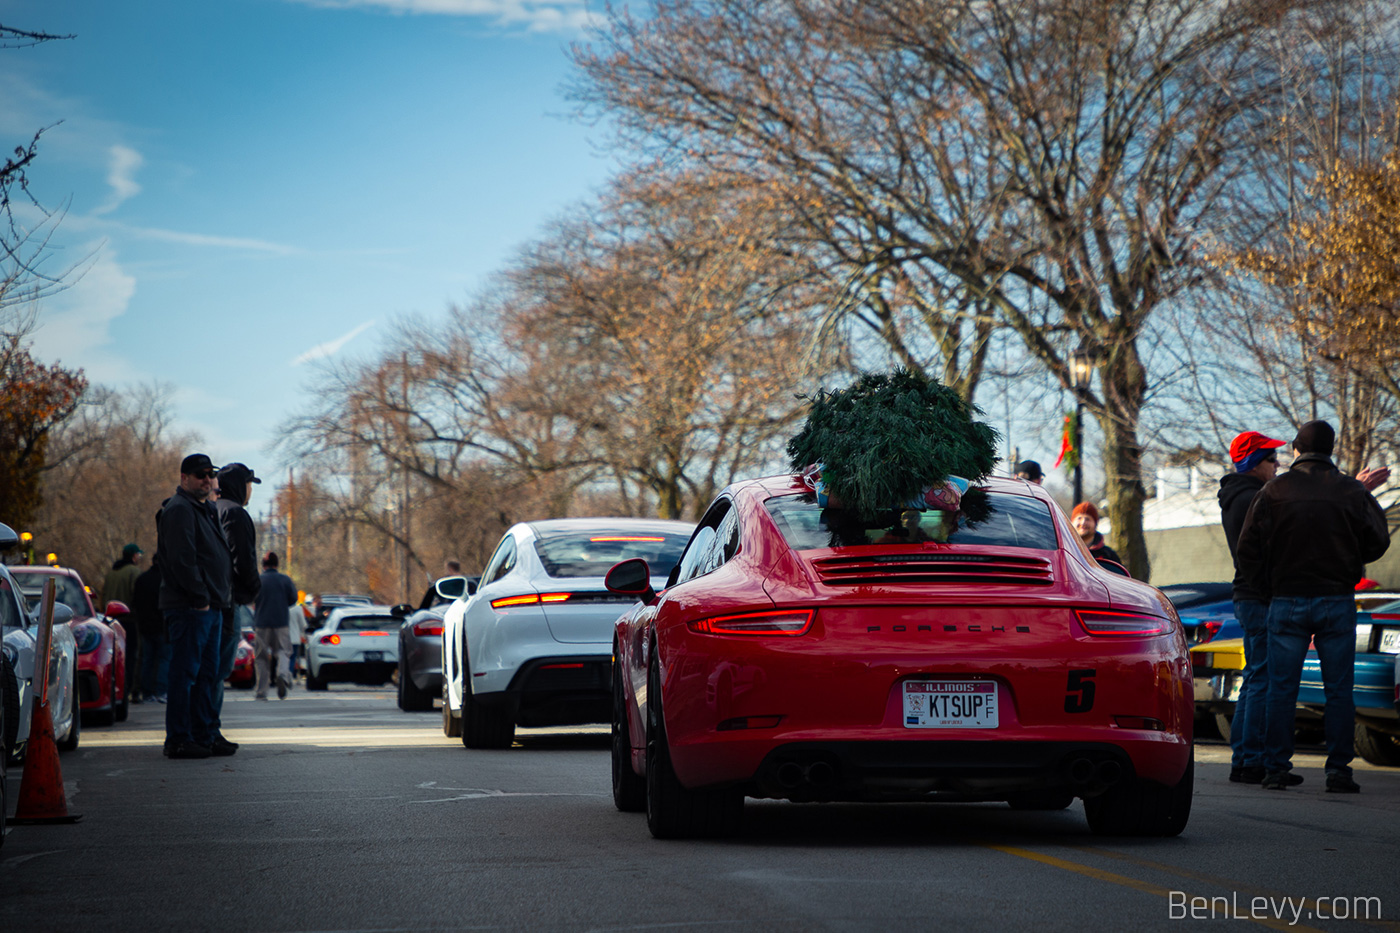 Porsche 911 Carrera S with Christmas Tree in Hinsdale